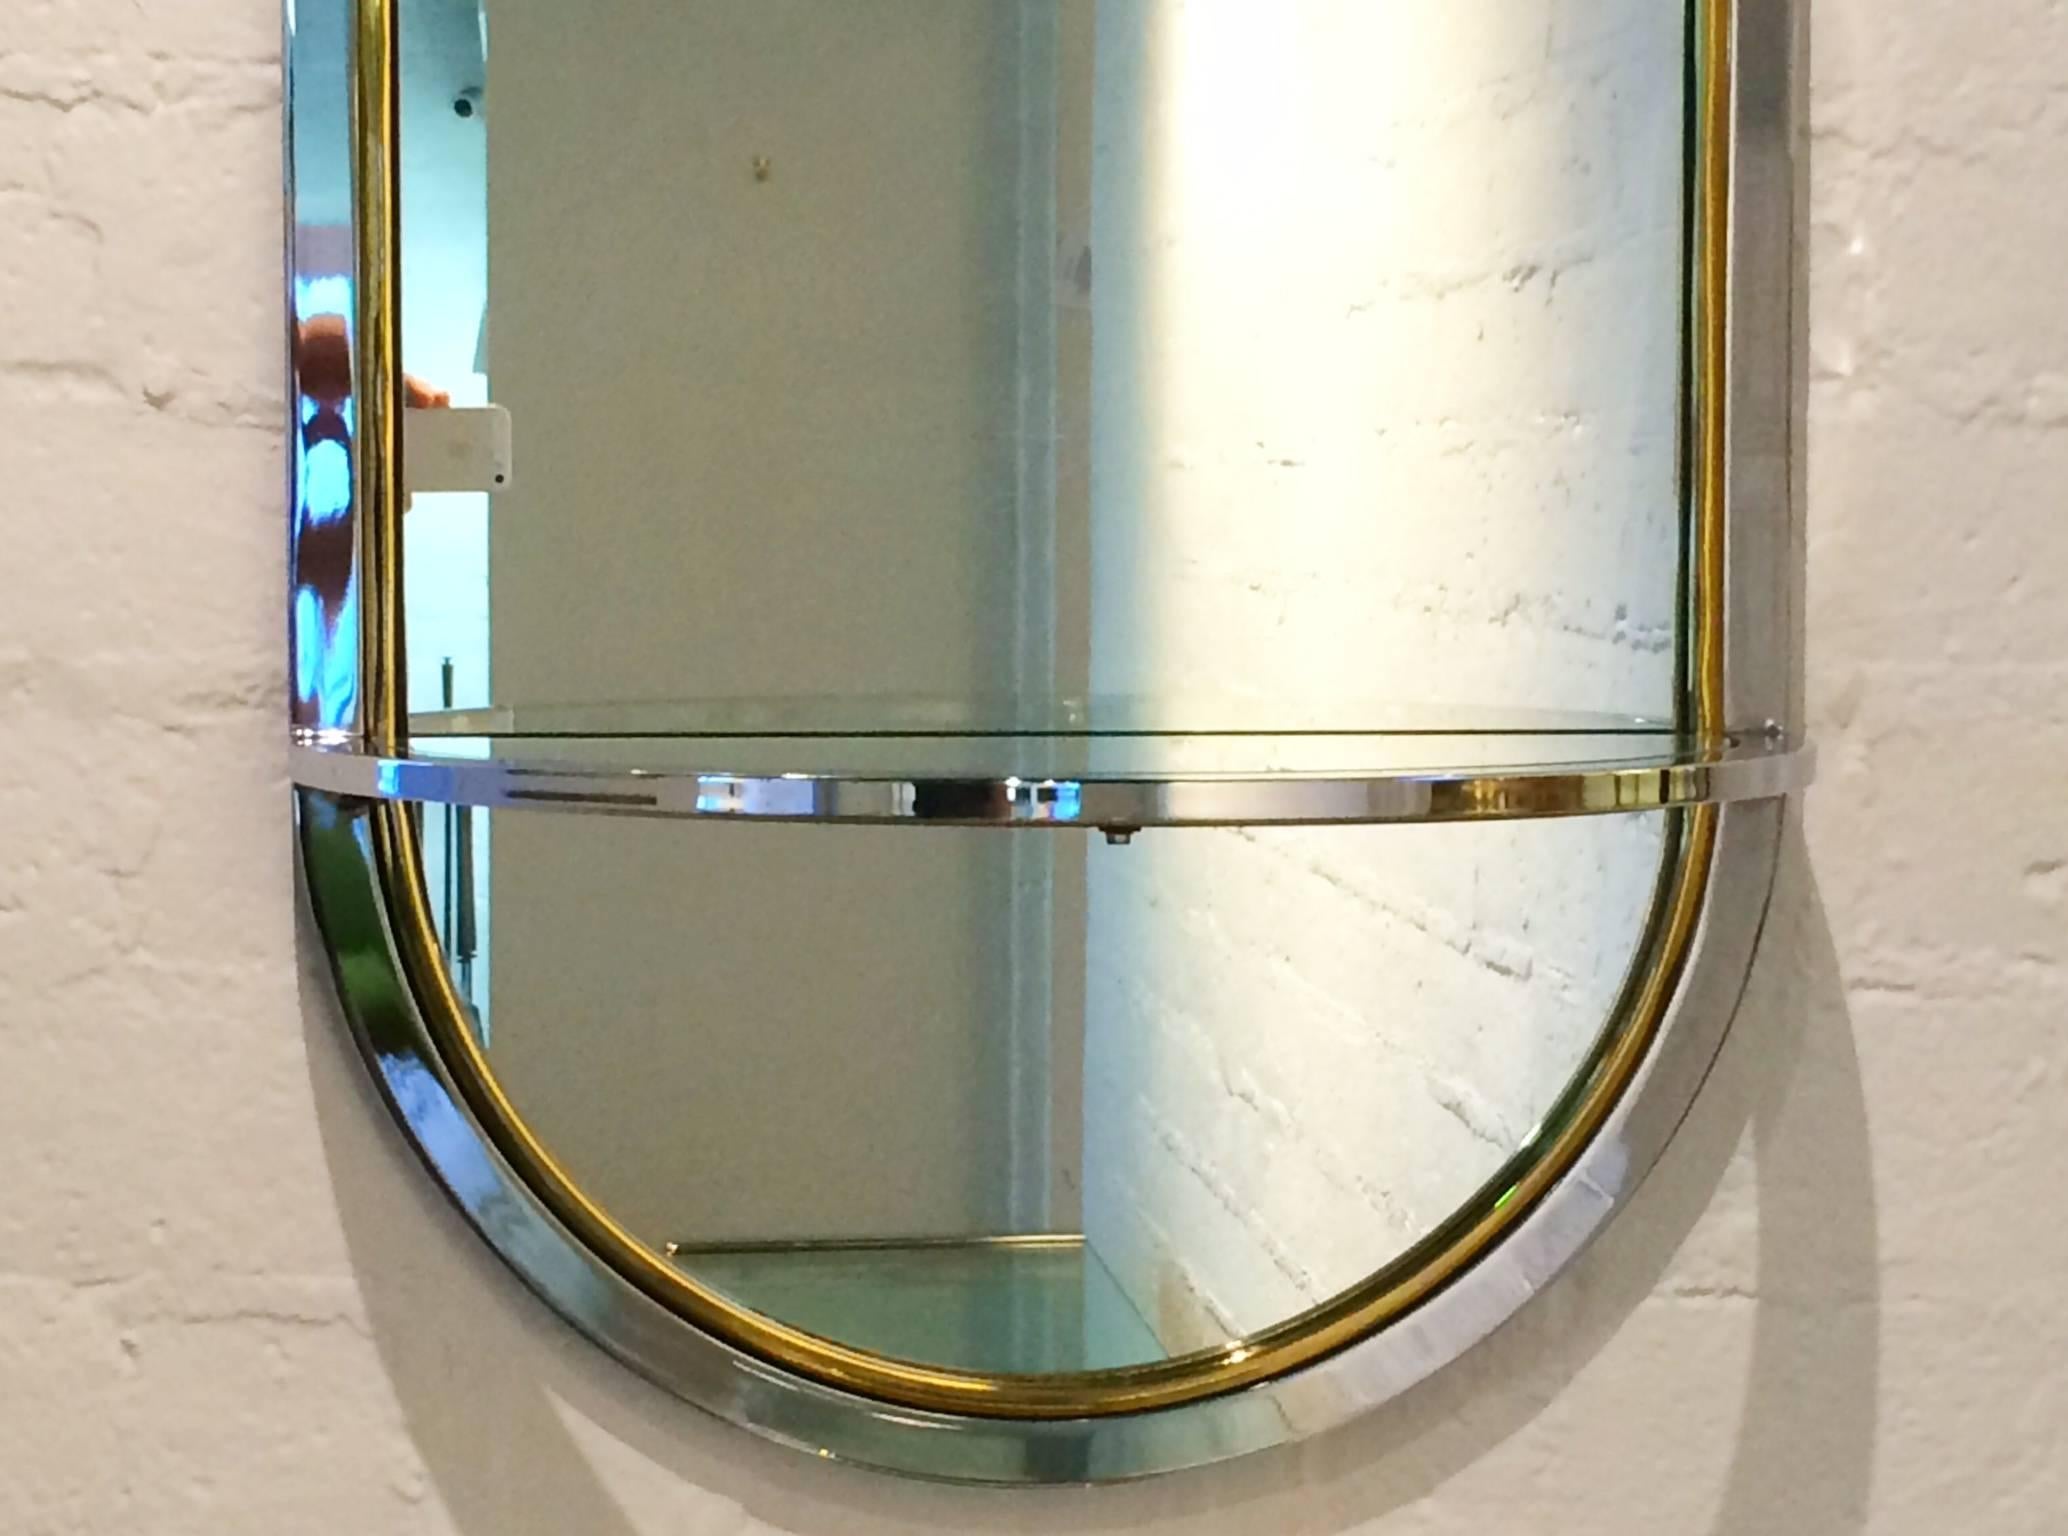 Organic Modern Chrome and Glass Mirror with Demilune Shelf by Pace Collection